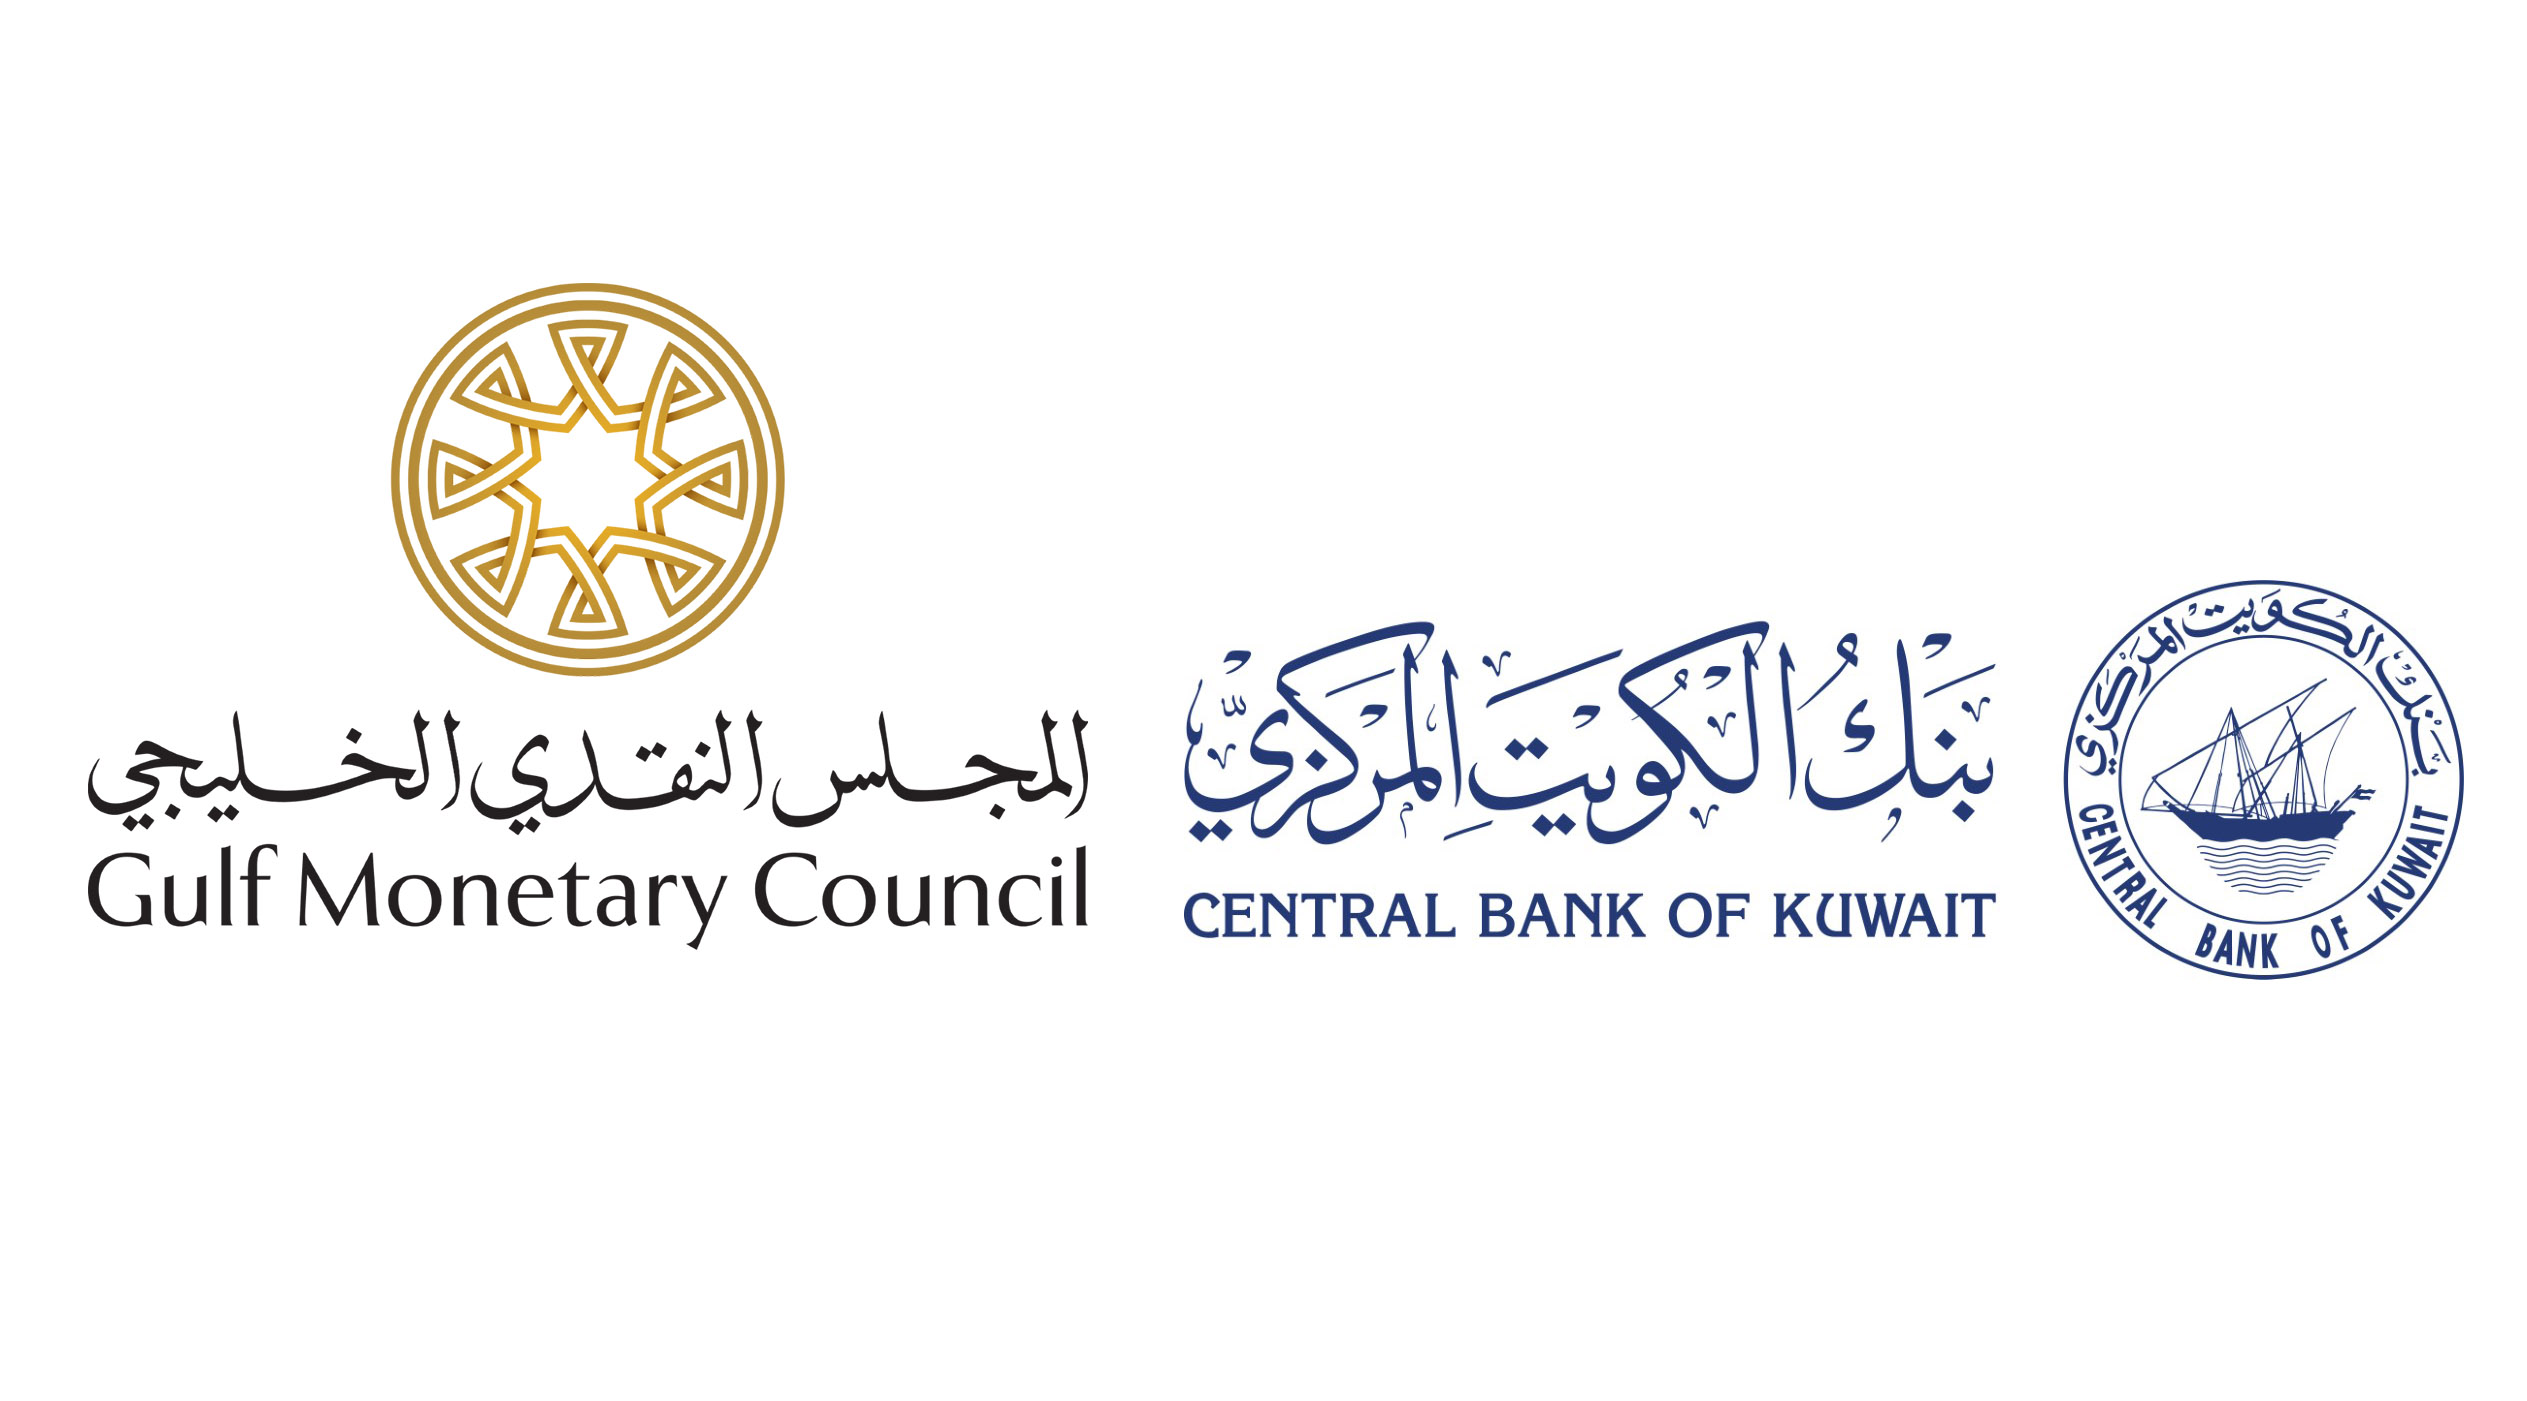 CBK hosts workshop on transitioning away from LIBOR                                                                                                                                                                                                       